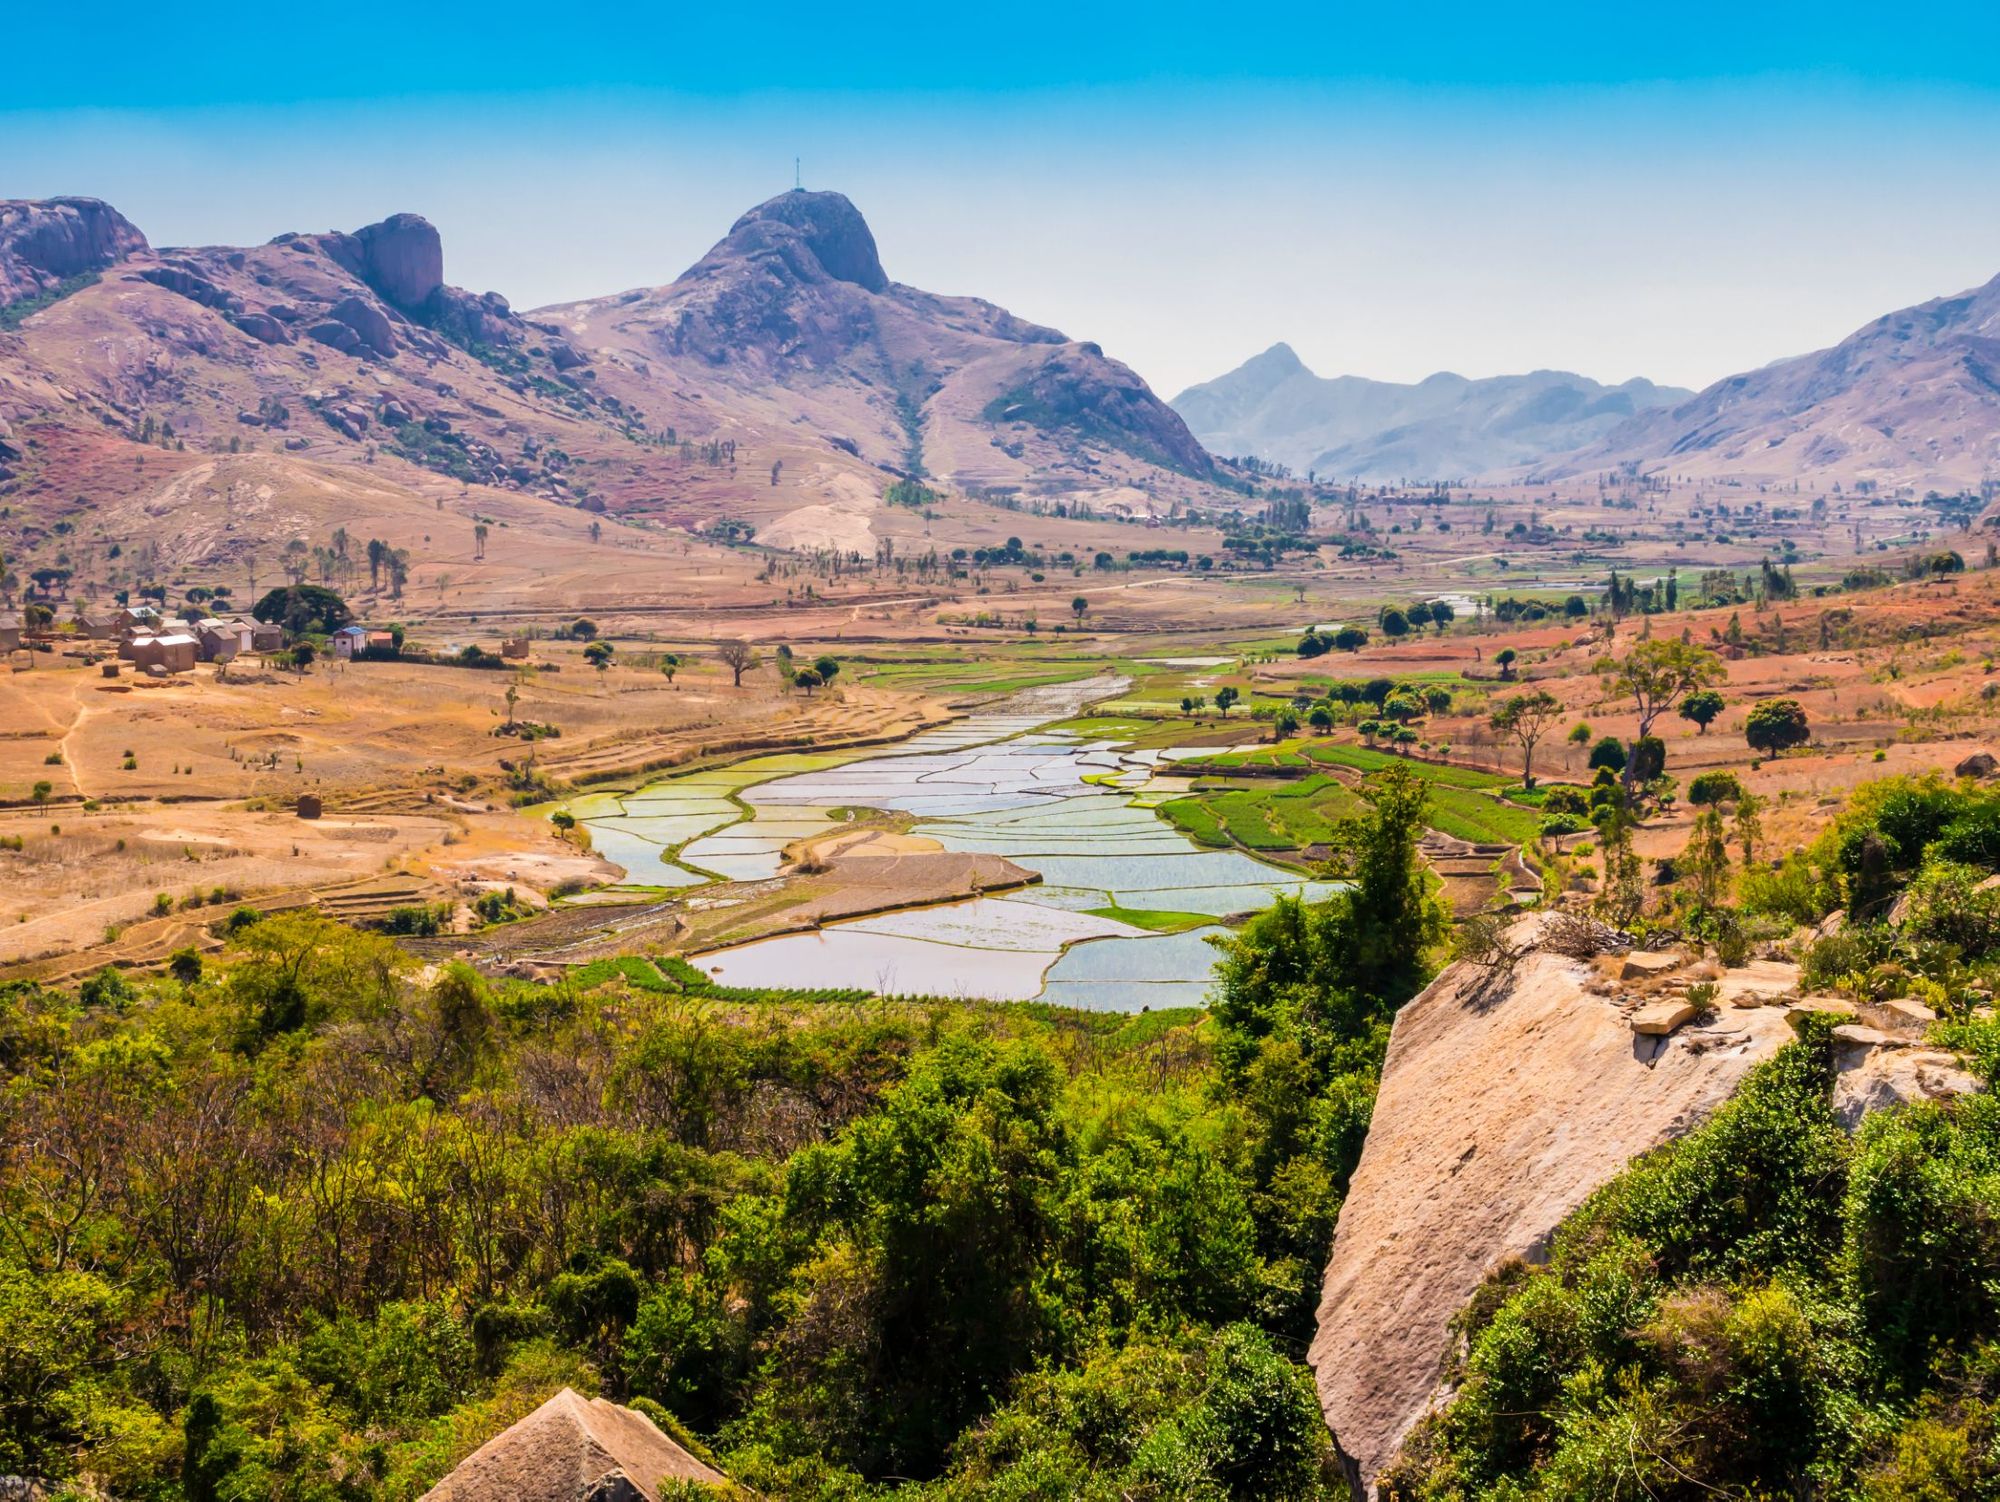 A view of the paddy fields and moutnains from Anja Community Reserve. Photo: Getty